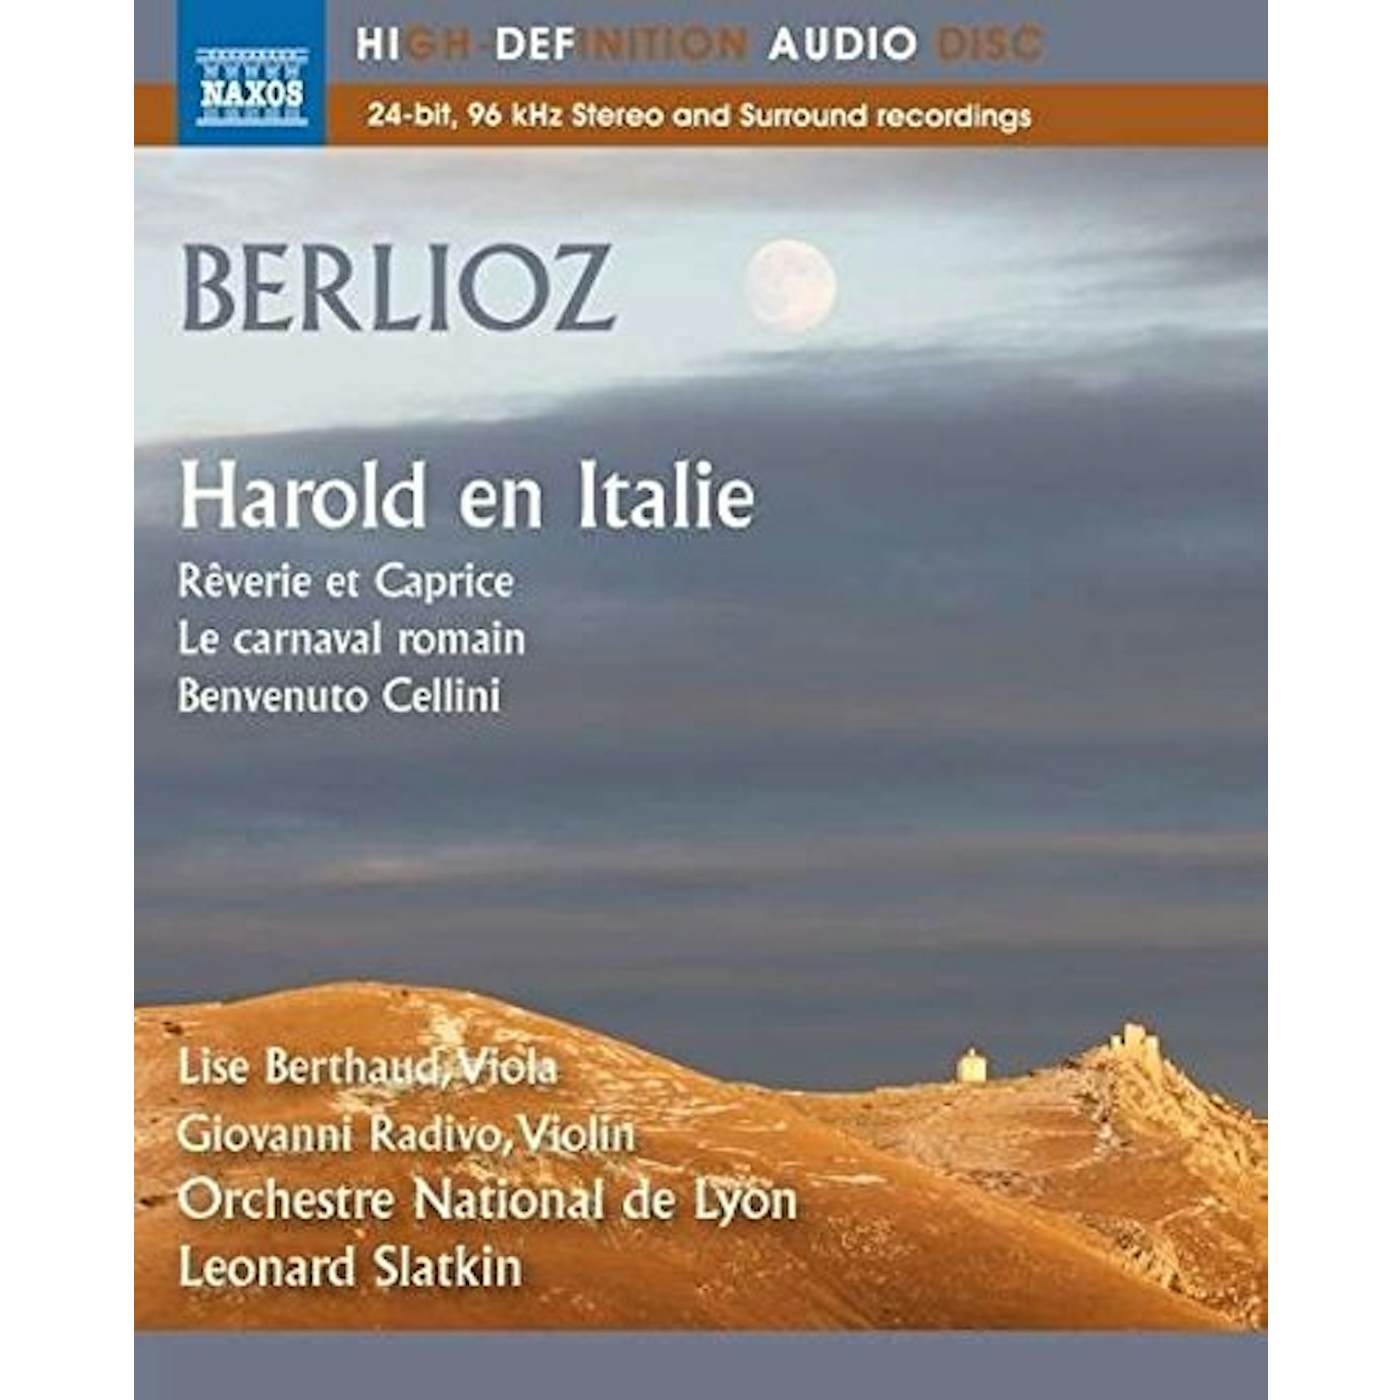 Berlioz WORKS FOR ORCH Blu-ray Audio